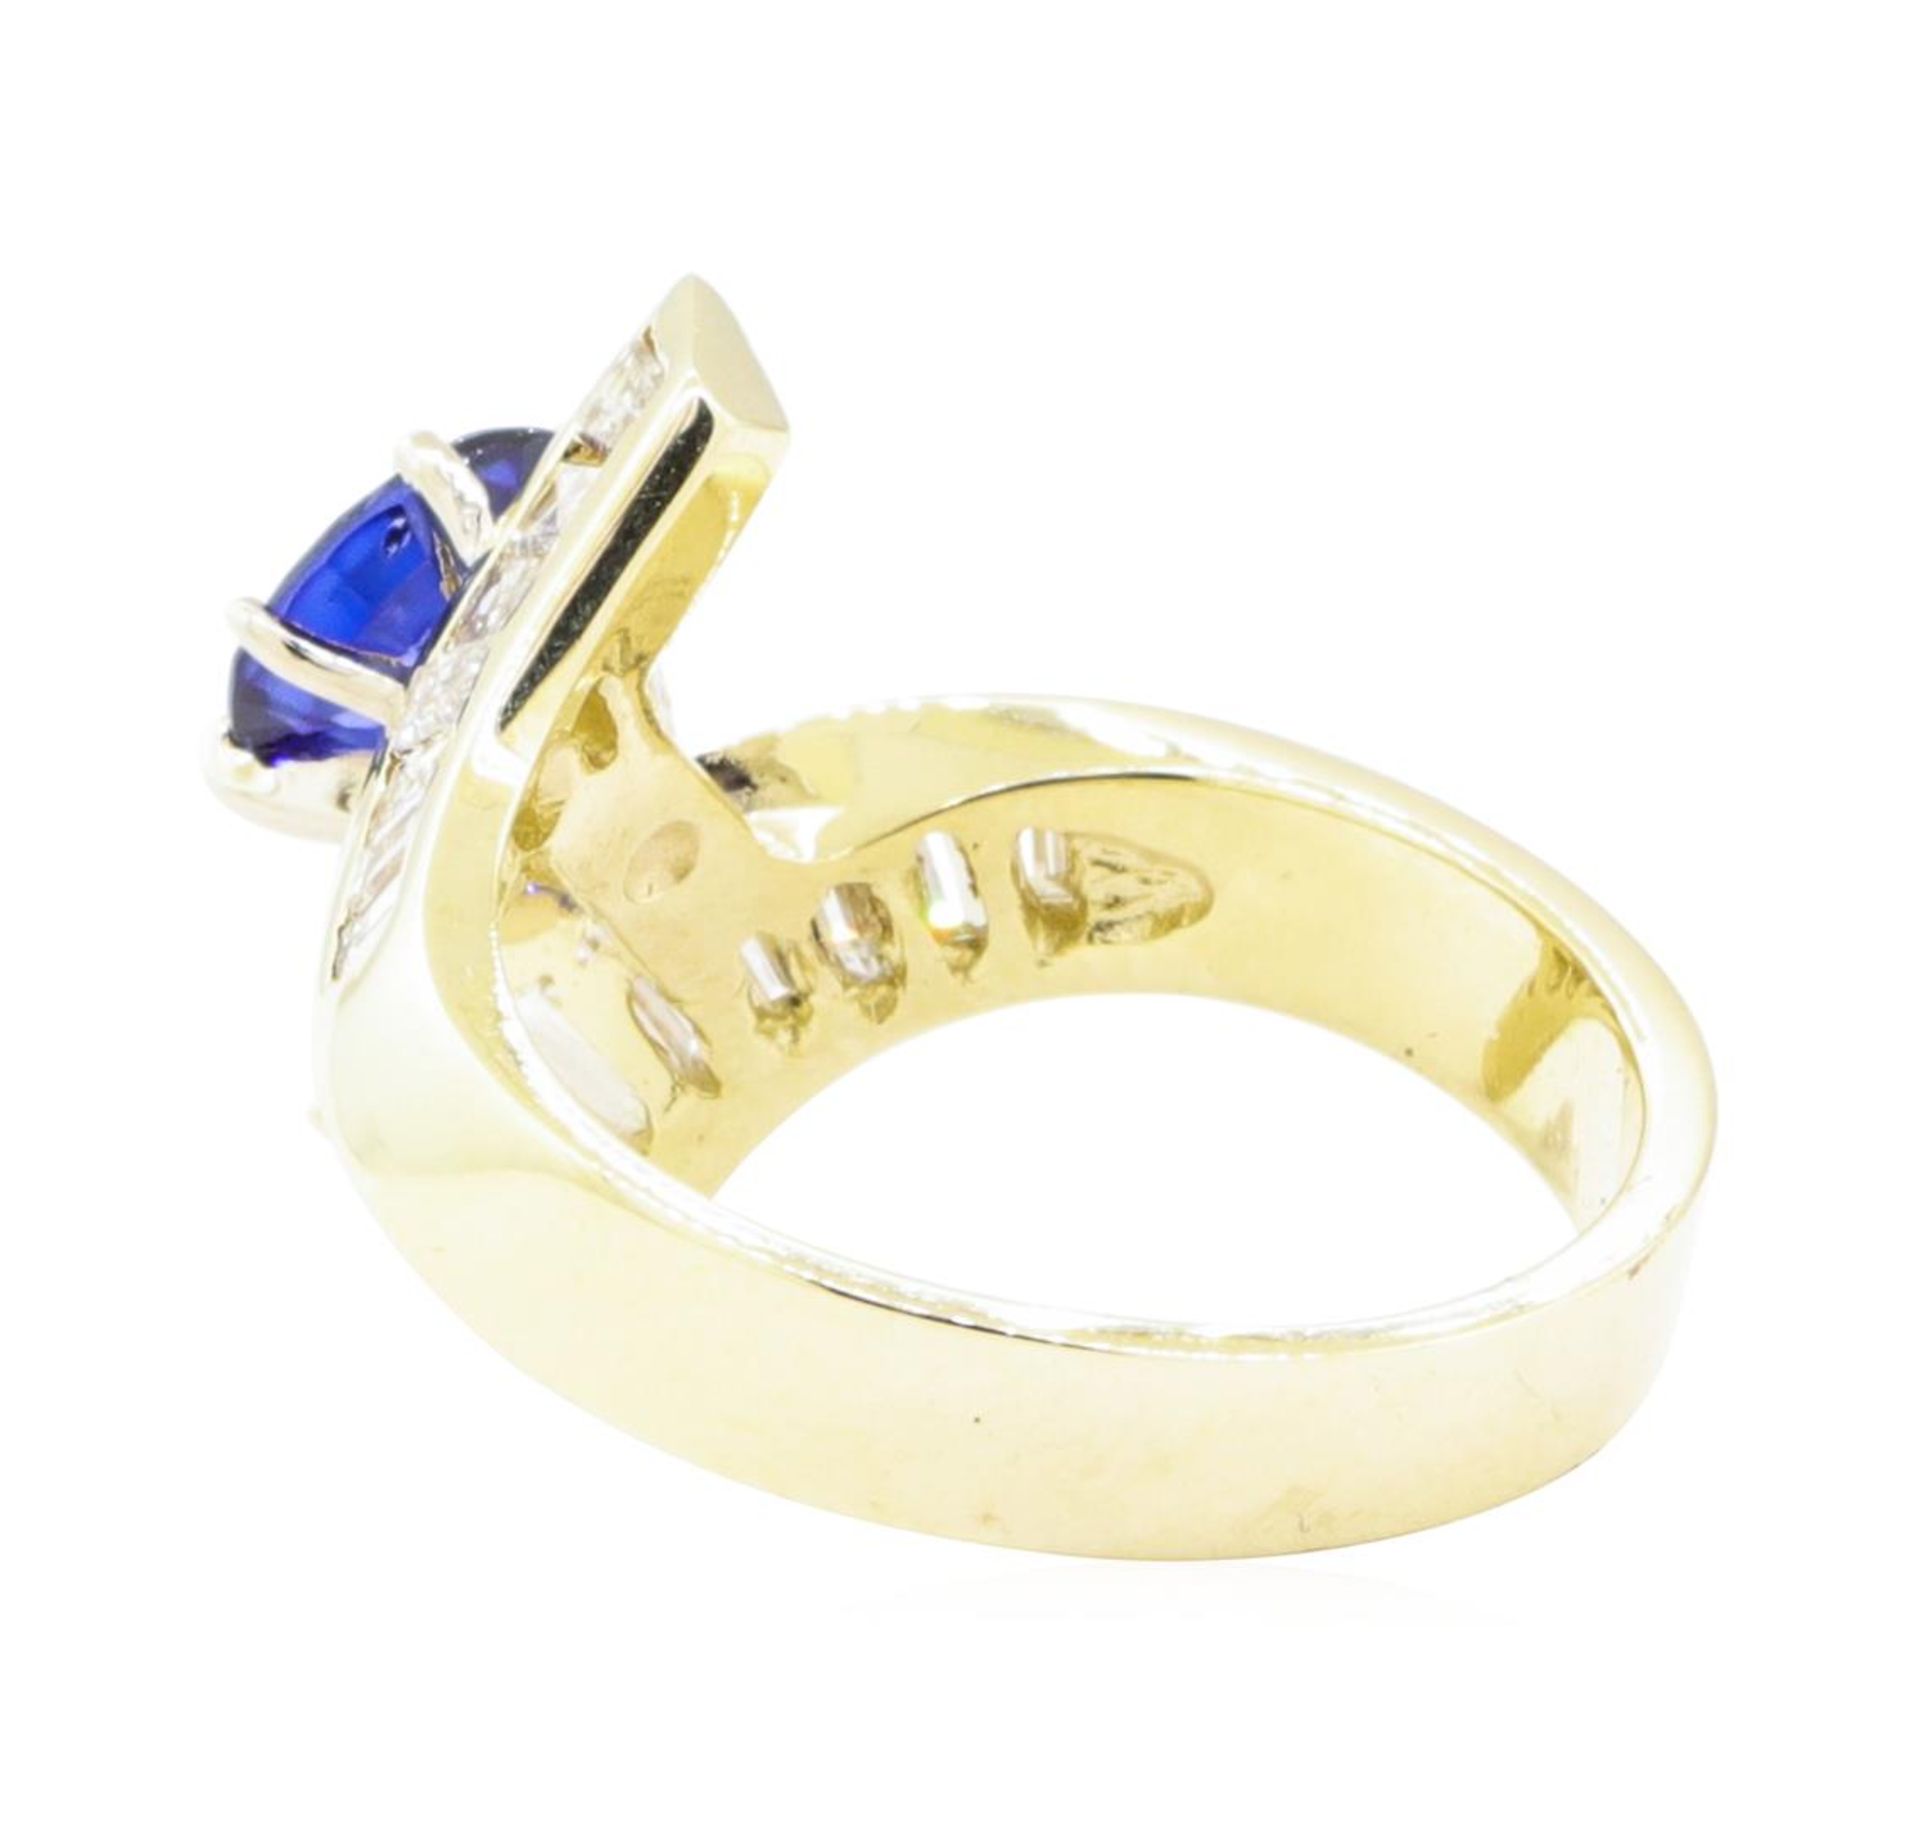 1.64 ctw Sapphire And Diamond Ring - 14KT Yellow Gold - Image 3 of 5